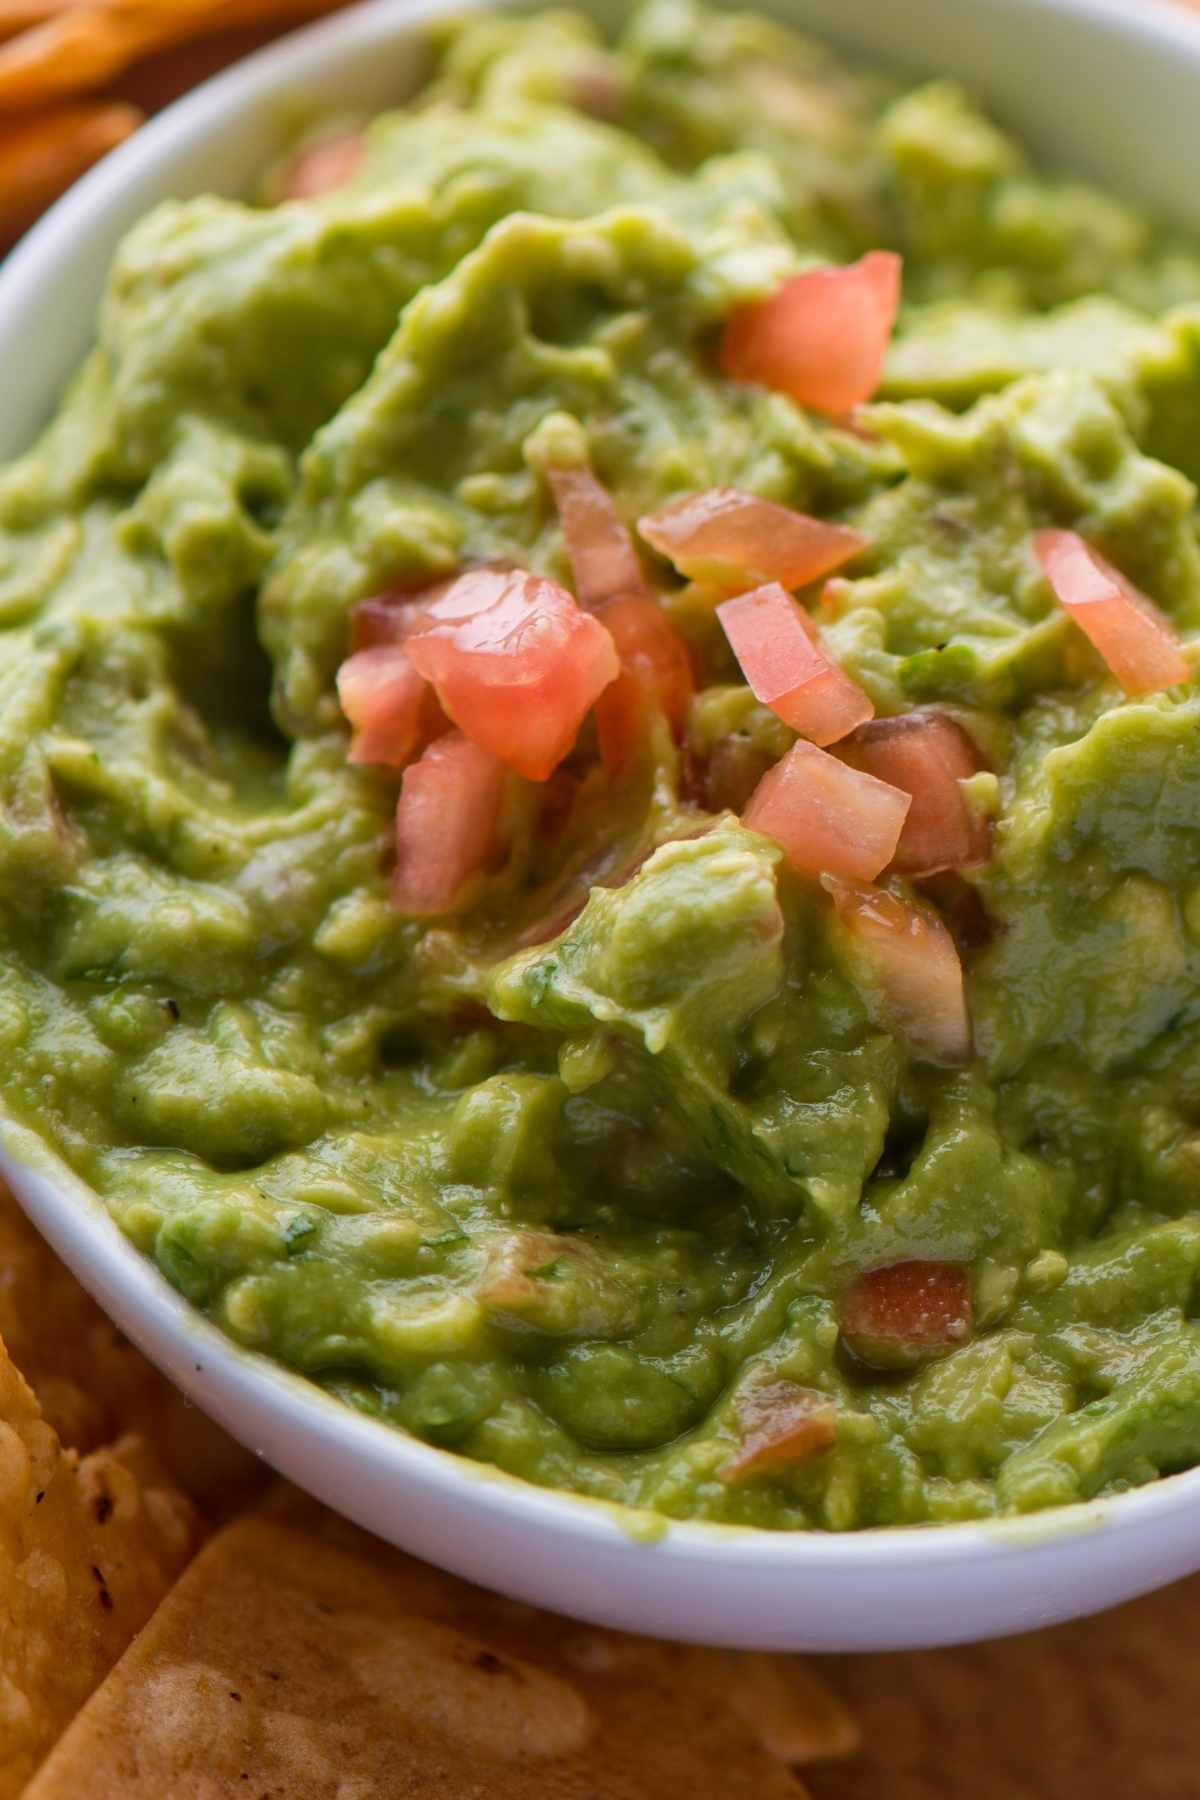 If you’ve been searching for guacamole that rivals anything you’ve had at a restaurant, this is the one. This Simple Homemade Guacamole Dip adapted from Alton Brown’s recipe is perfect to enjoy with your favorite Mexican dishes, and is also delicious served on toast!